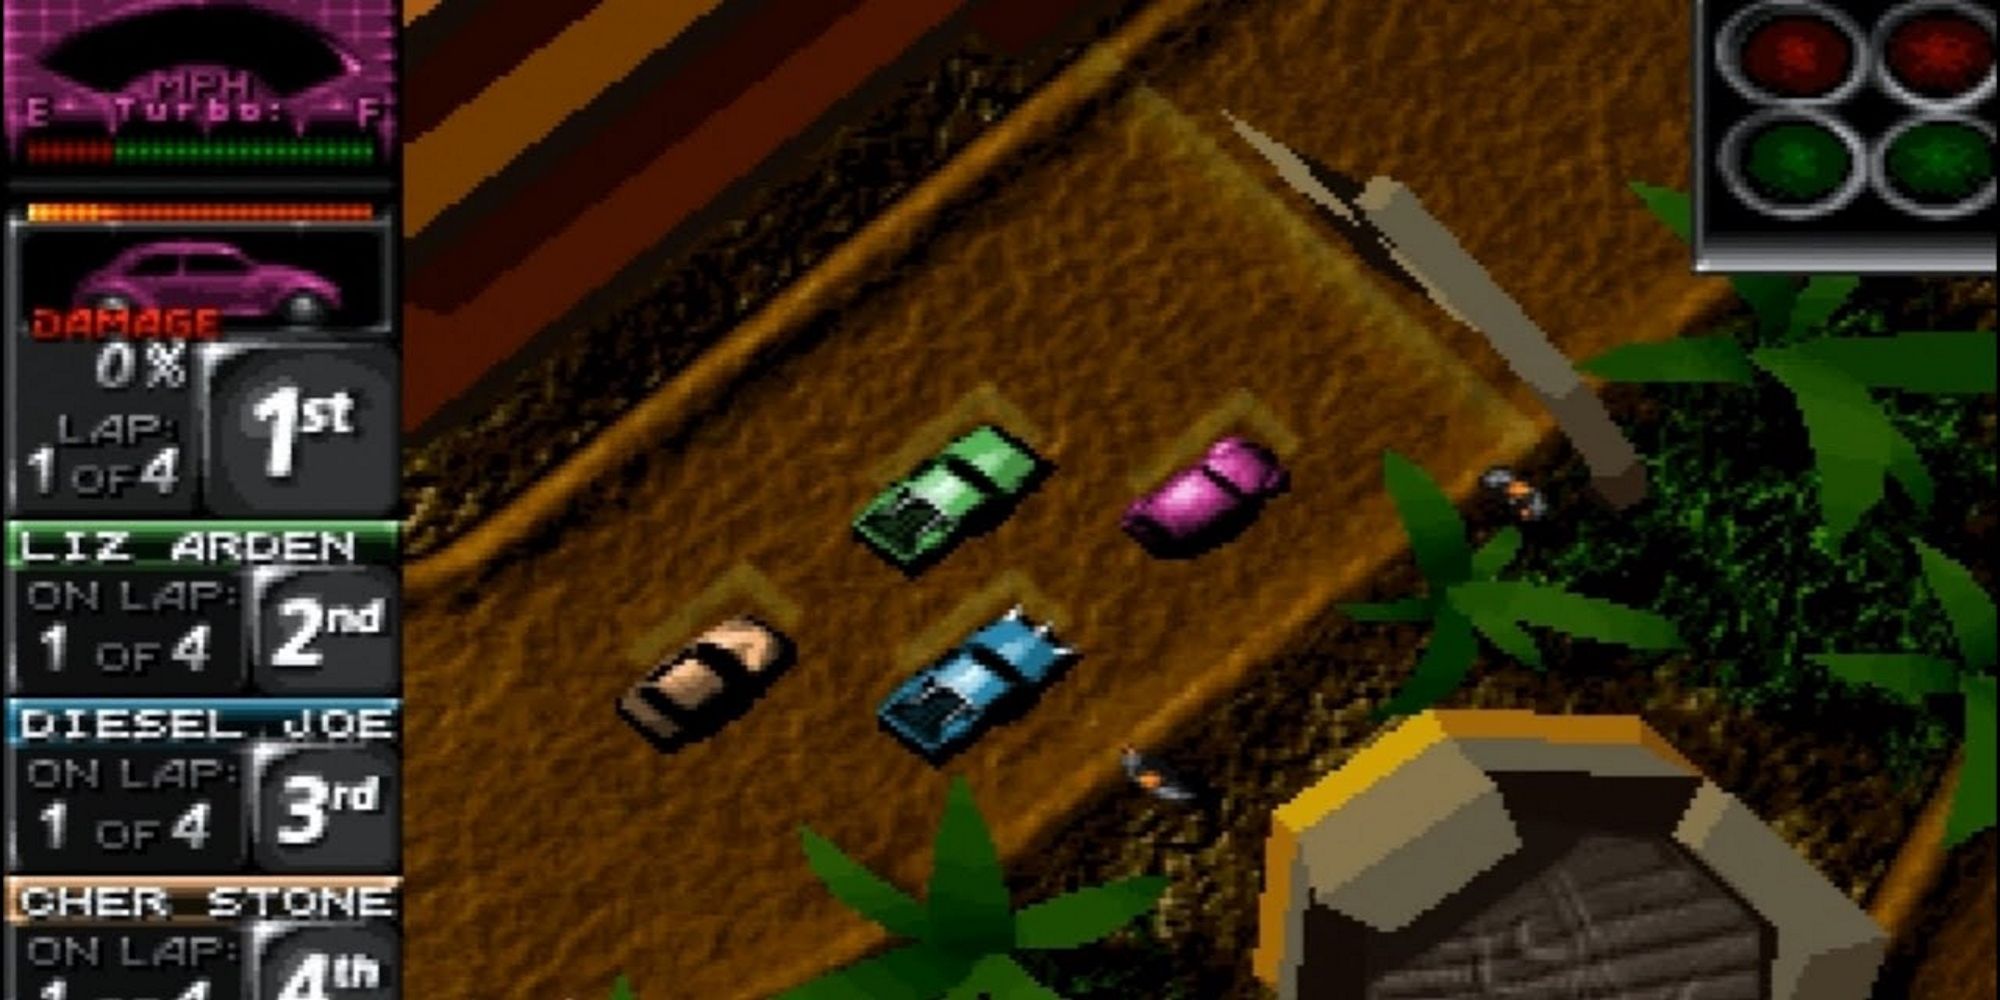 Gameplay from the original Death Rally game from 1996, with green, yellow, blue, and purple cars racing.